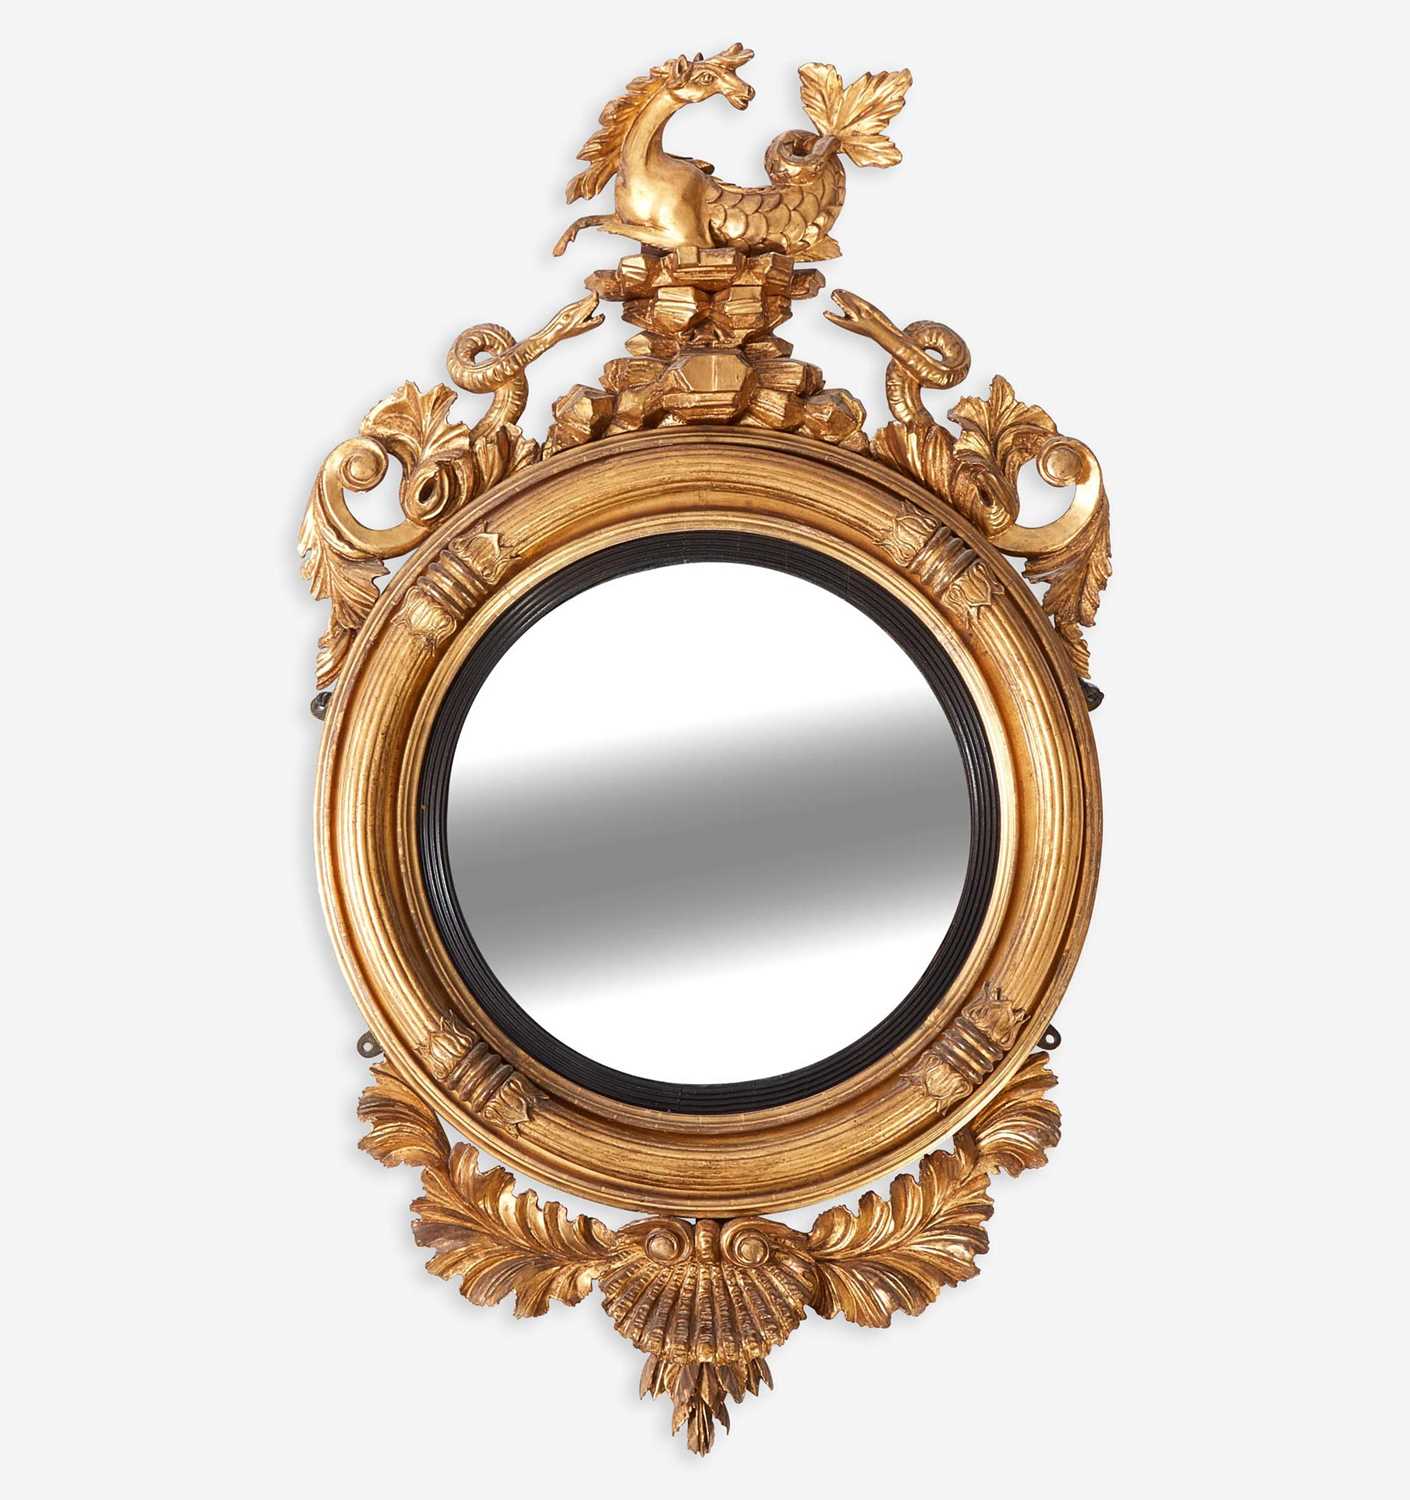 Lot 74 - A Regency Carved Giltwood Convex Mirror